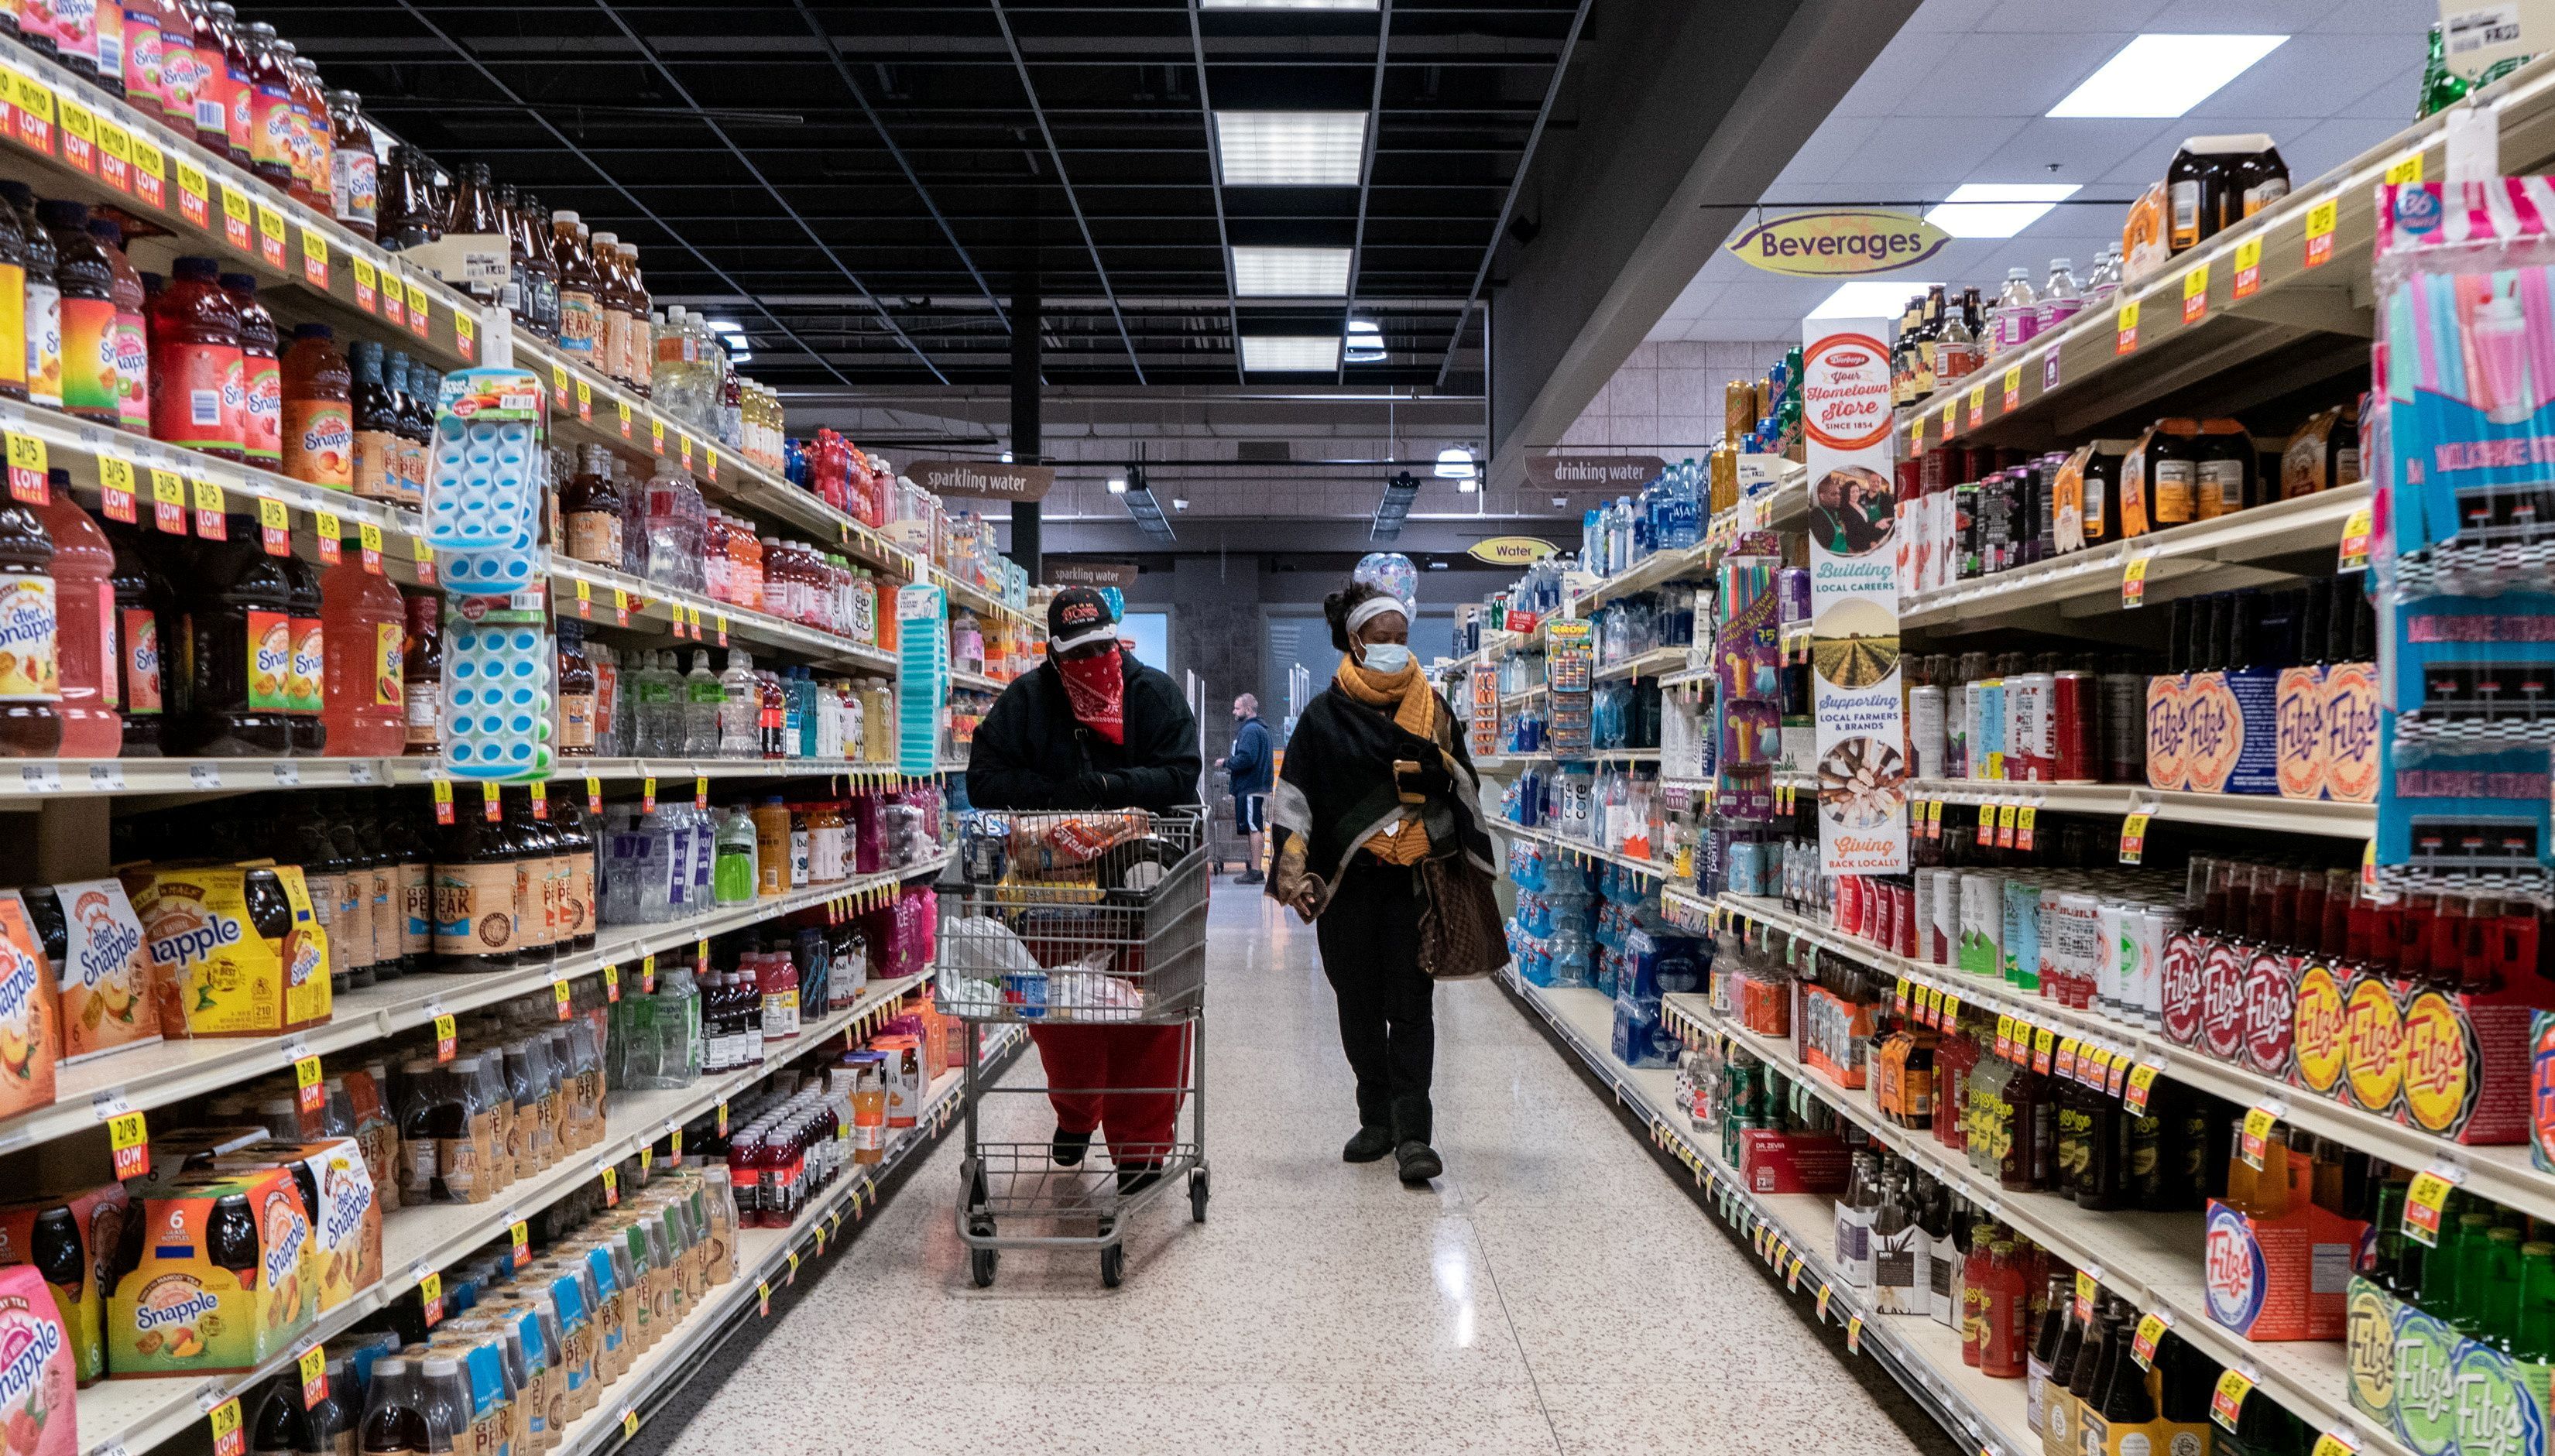 Shoppers browse in a supermarket while wearing masks to help slow the spread of coronavirus disease (COVID-19) in north St. Louis, Missouri, U.S. April 4, 2020. REUTERS/Lawrence Bryant/File Photo